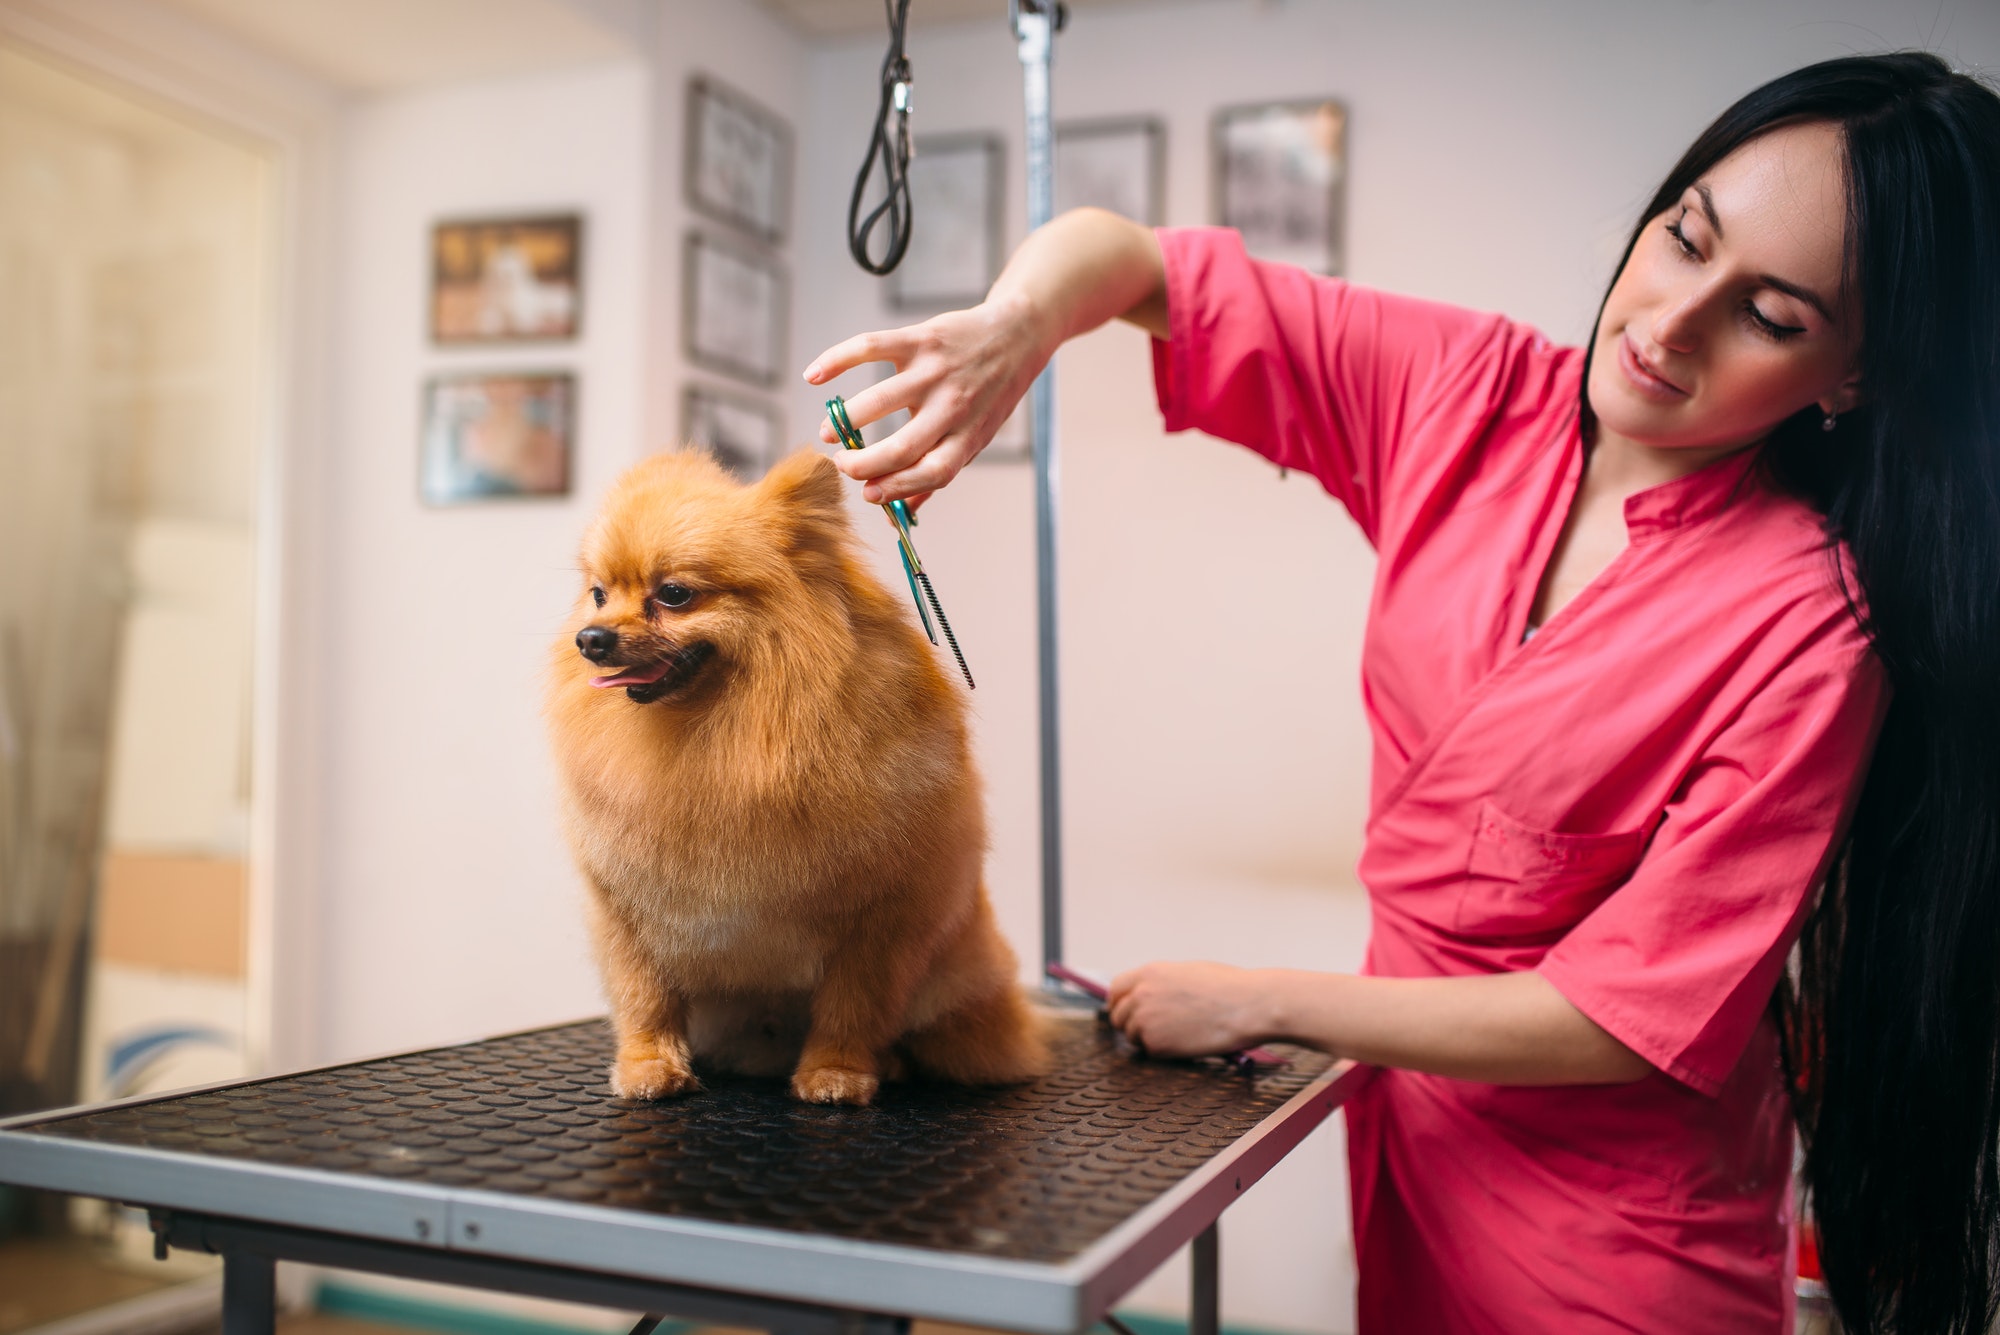 Pet groomer with scissors makes grooming dog